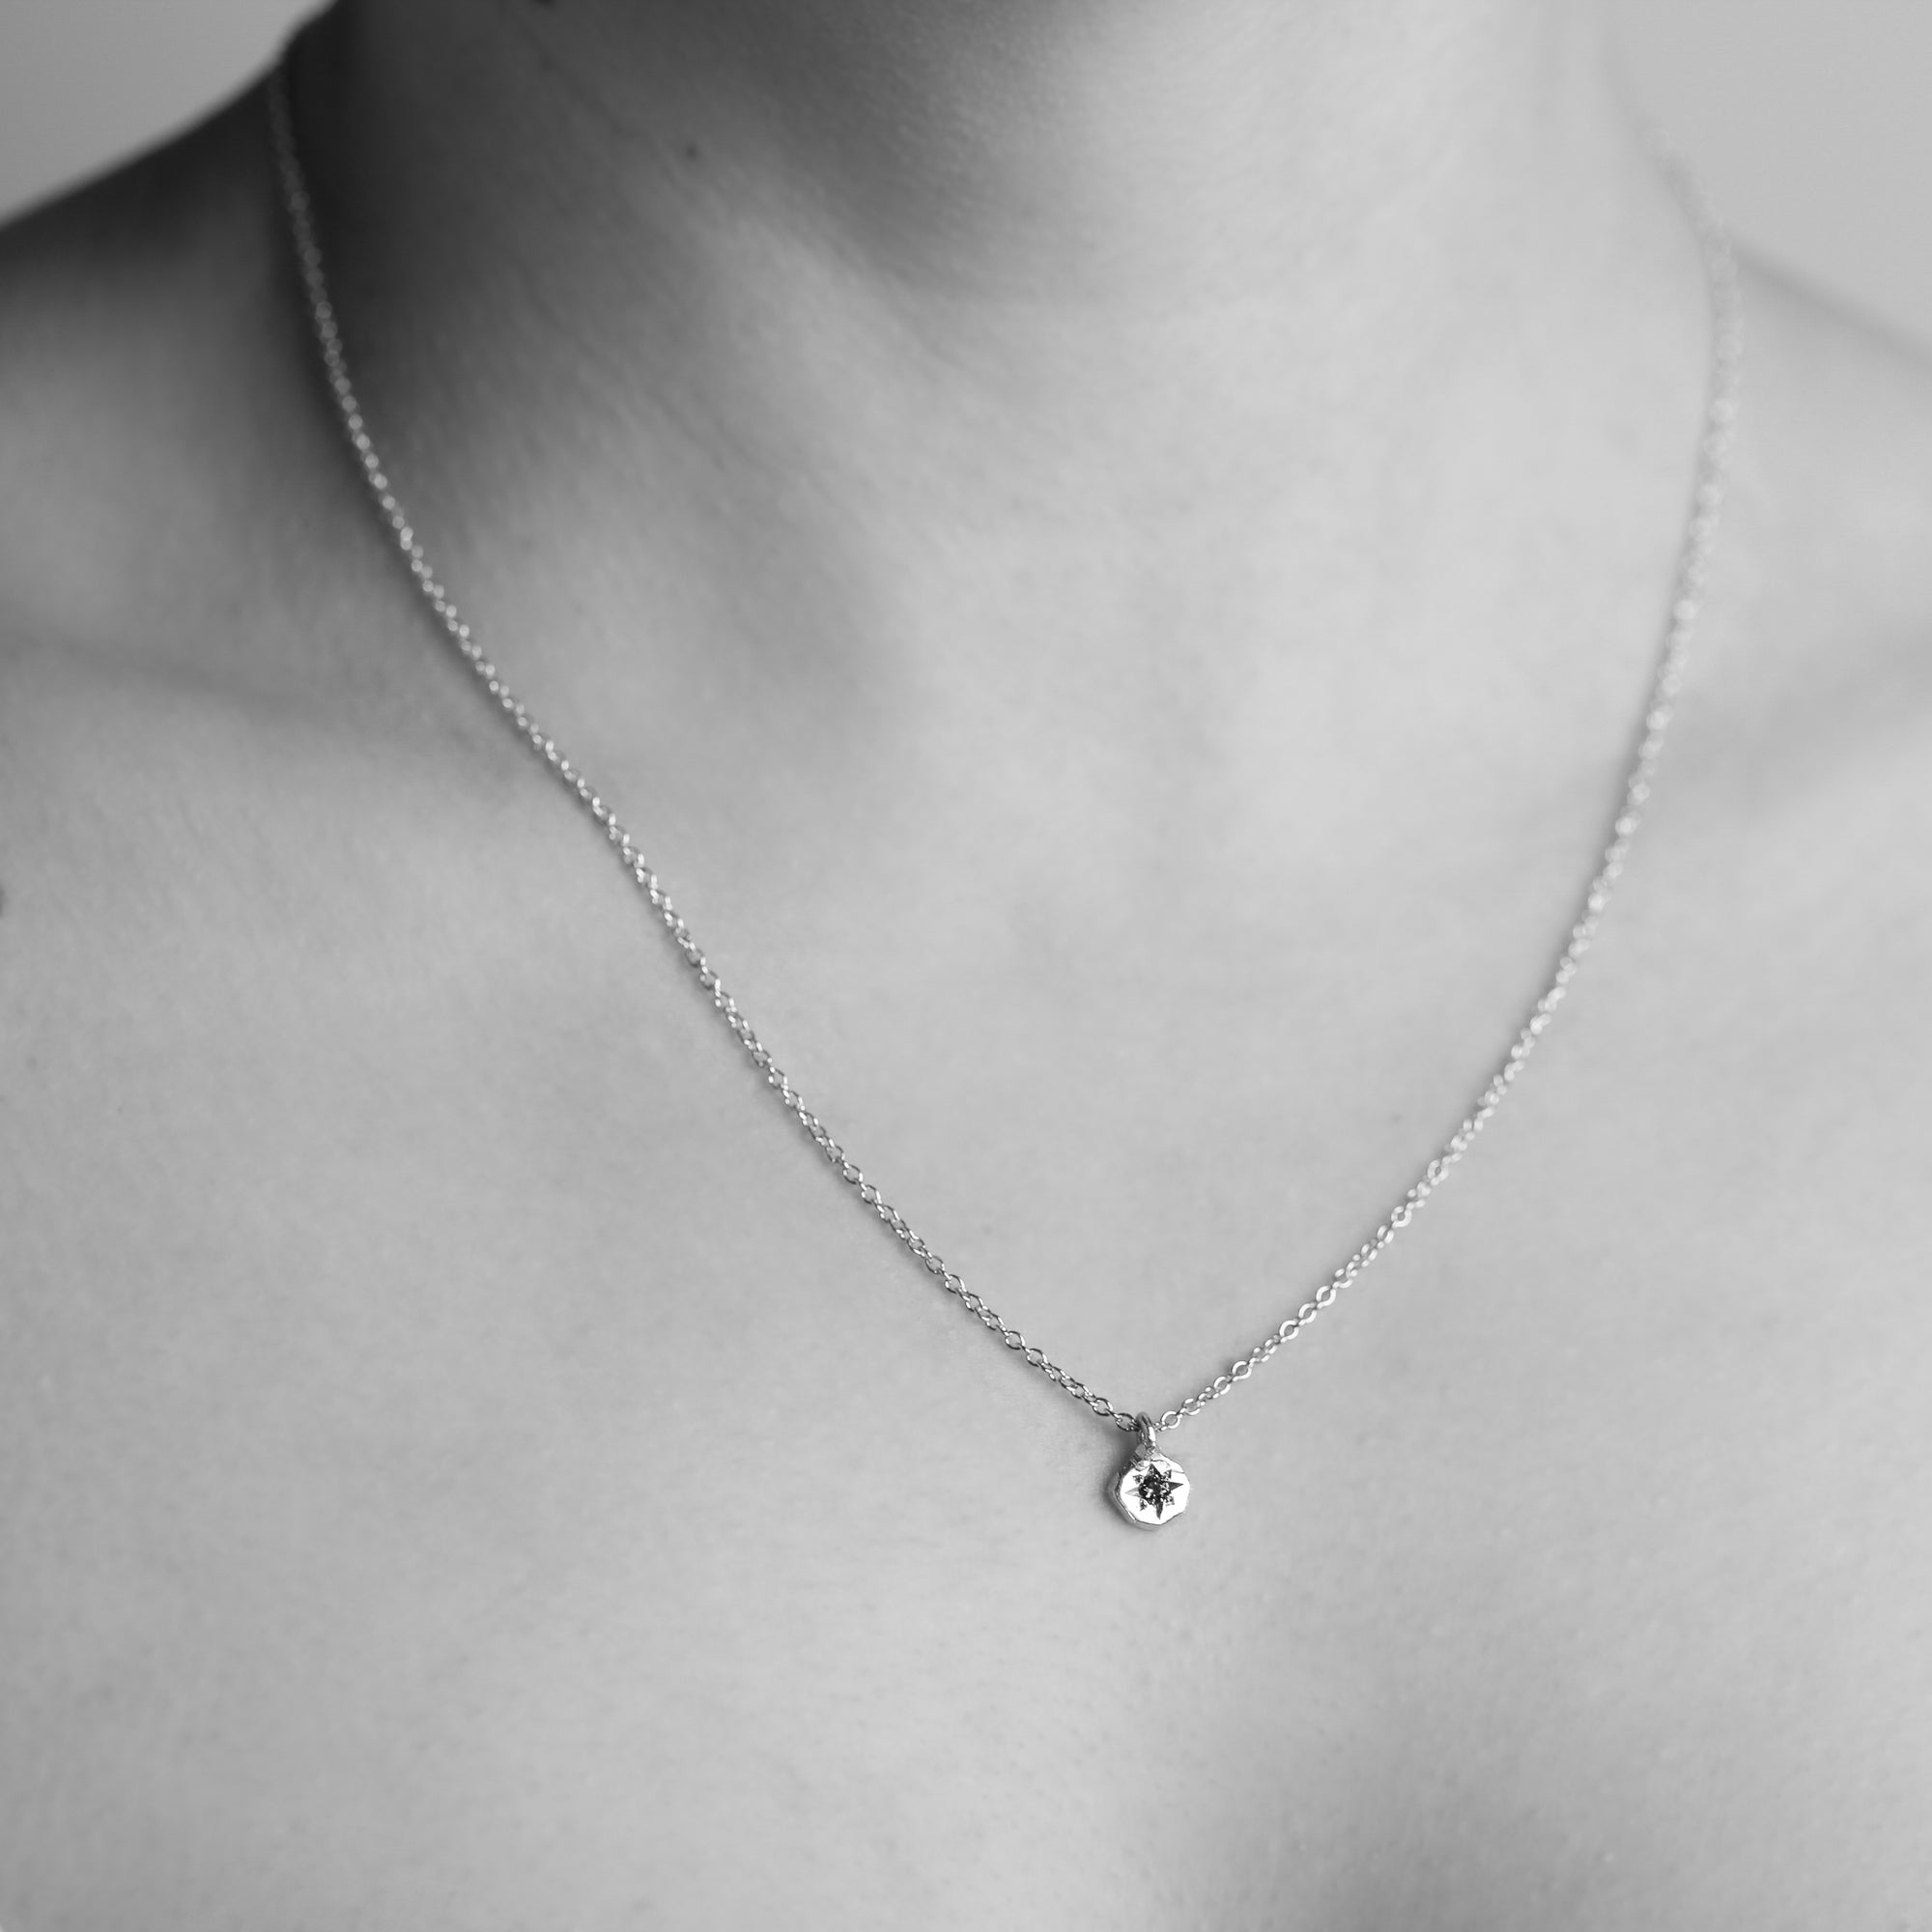 Dainty pendant crafted in 9ct yellow gold with recycled, refined gold. Featuring an ethically sourced Australian teal sapphire on an 9ct gold chain. Shown on model. 